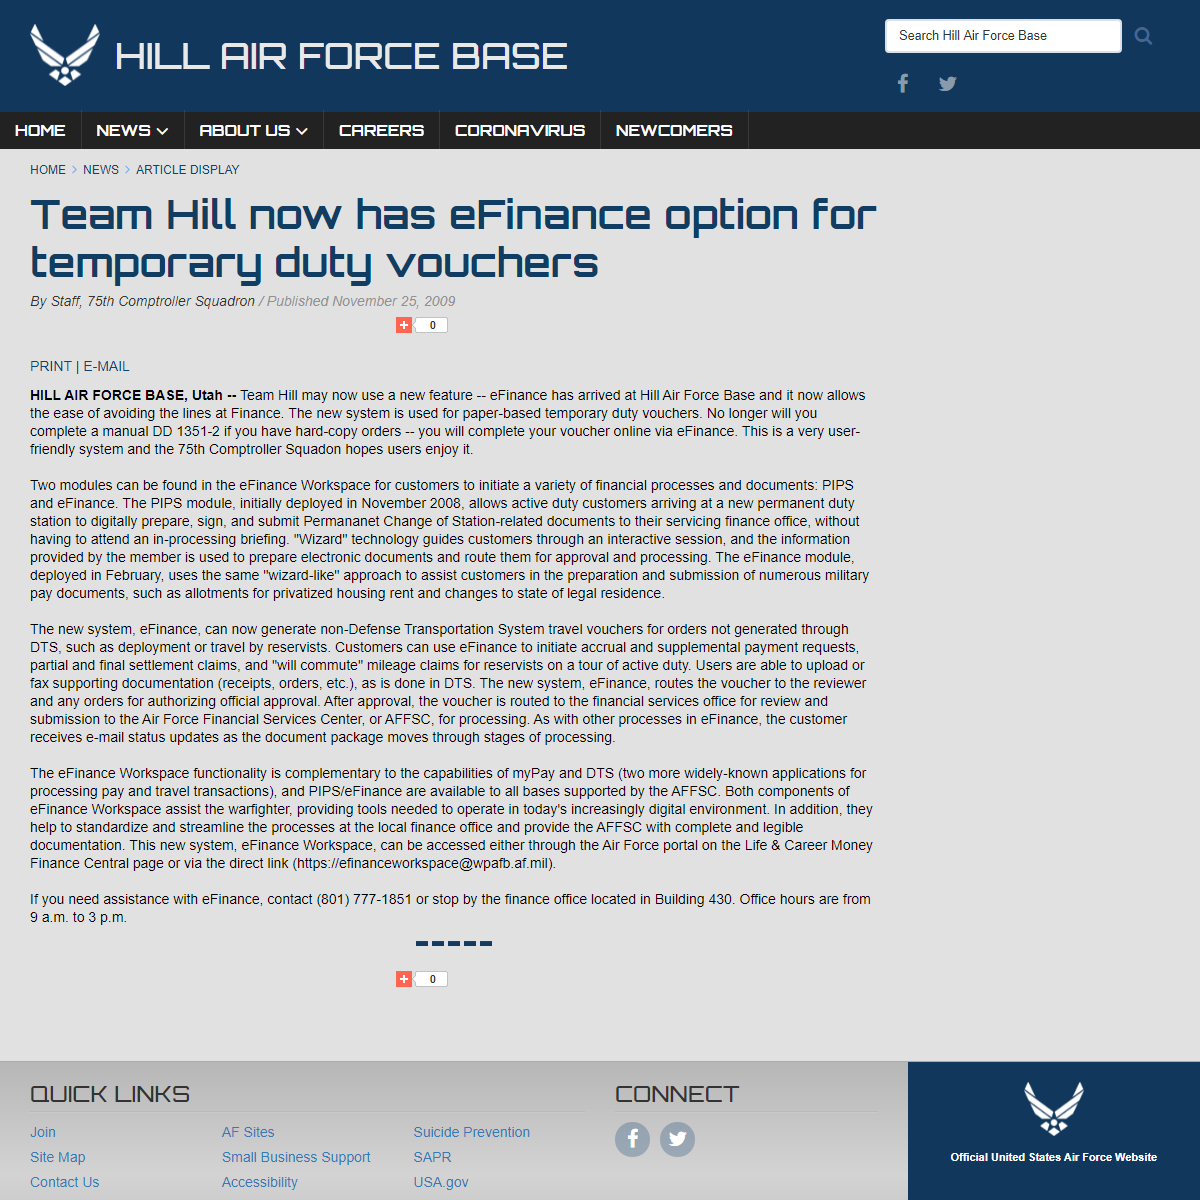 A complete backup of https://www.hill.af.mil/News/Article-Display/Article/398021/team-hill-now-has-efinance-option-for-temporary